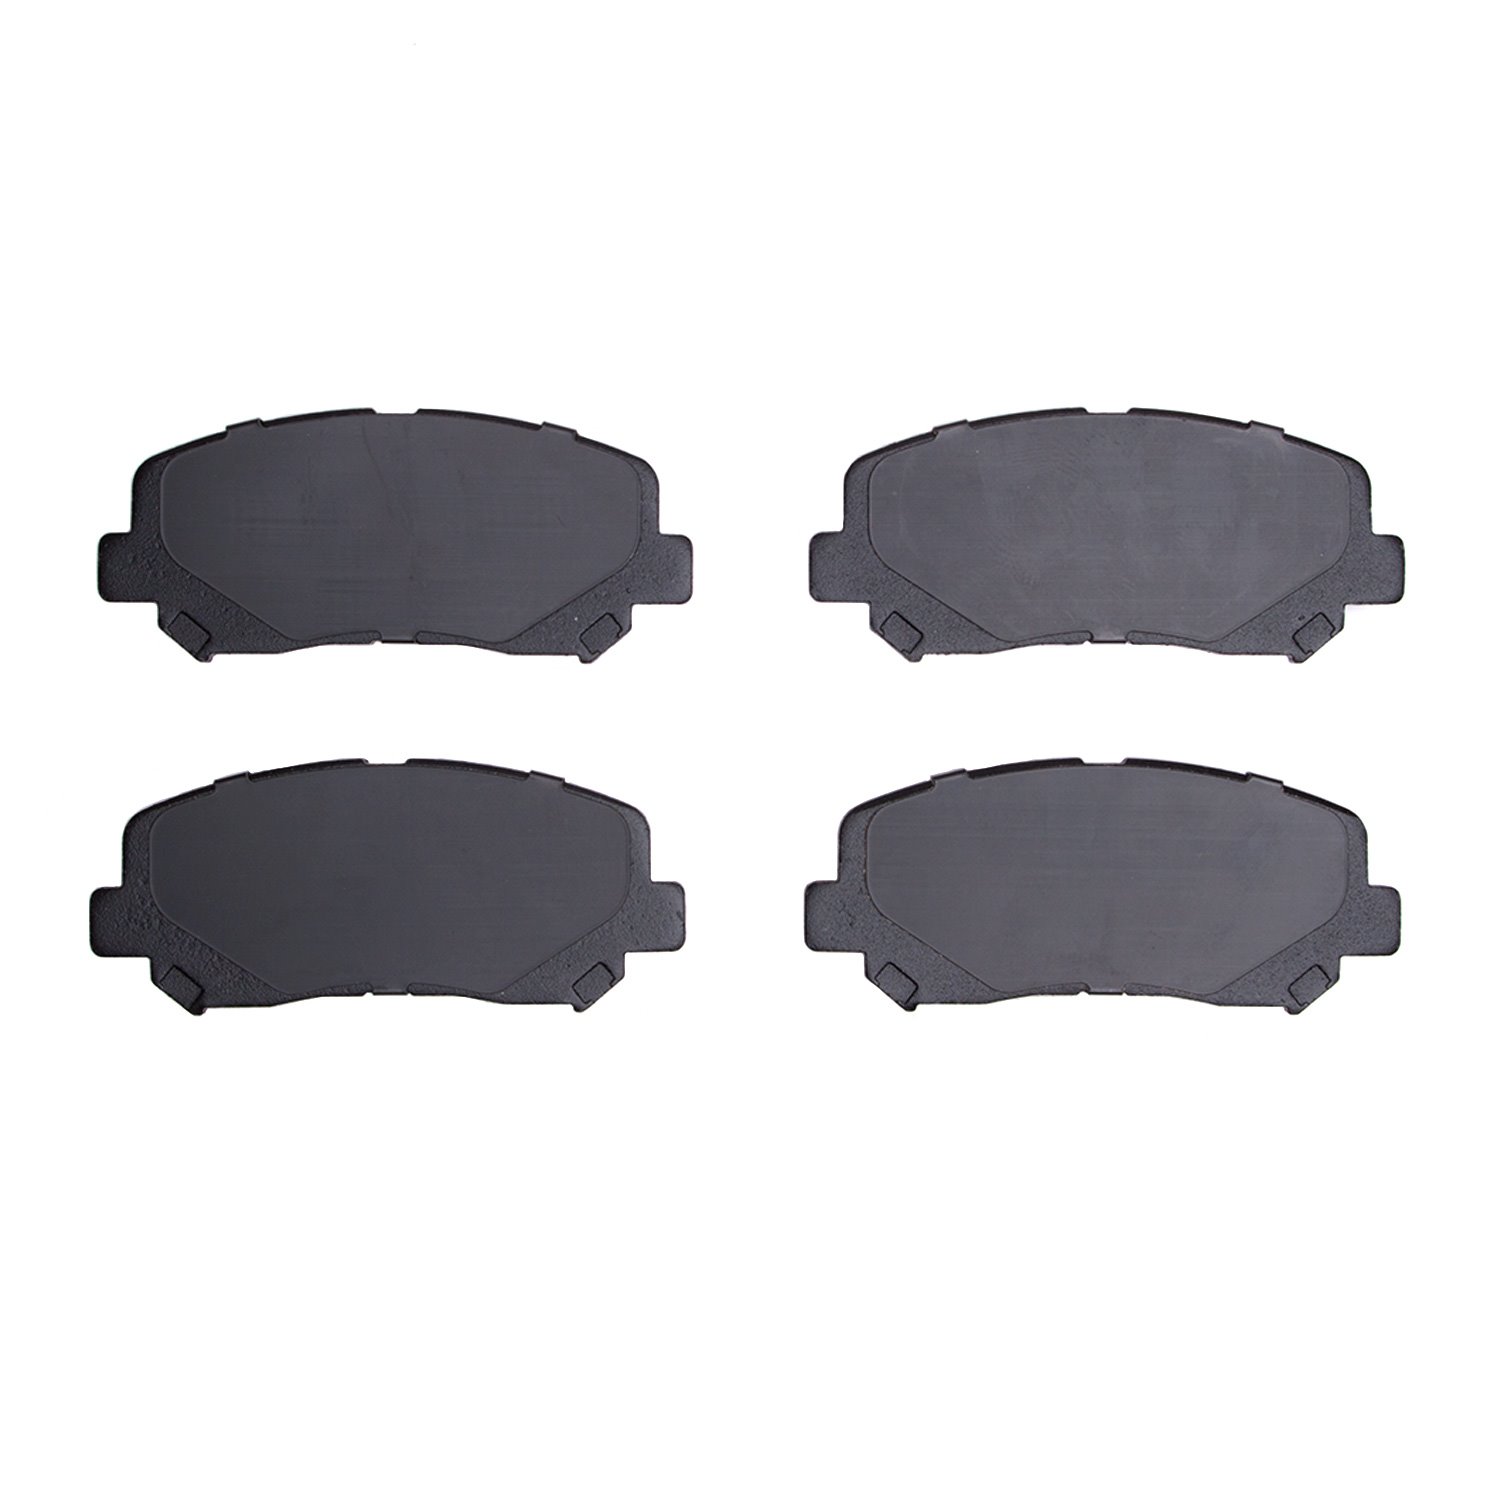 1310-1623-00 3000-Series Ceramic Brake Pads, Fits Select Ford/Lincoln/Mercury/Mazda, Position: Front